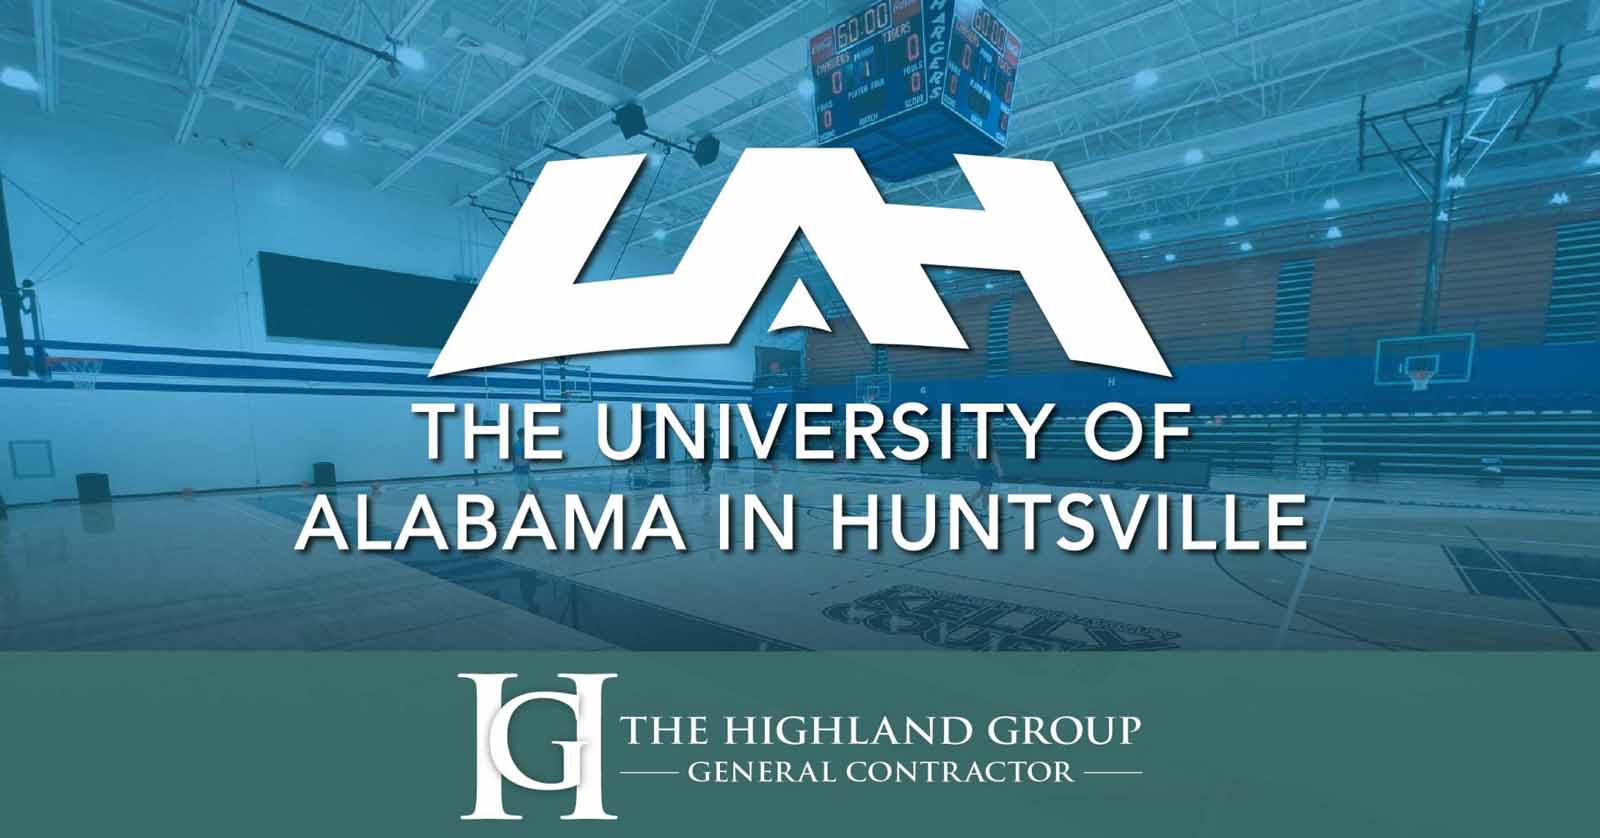 The Highland Group Completes Huntsville Project